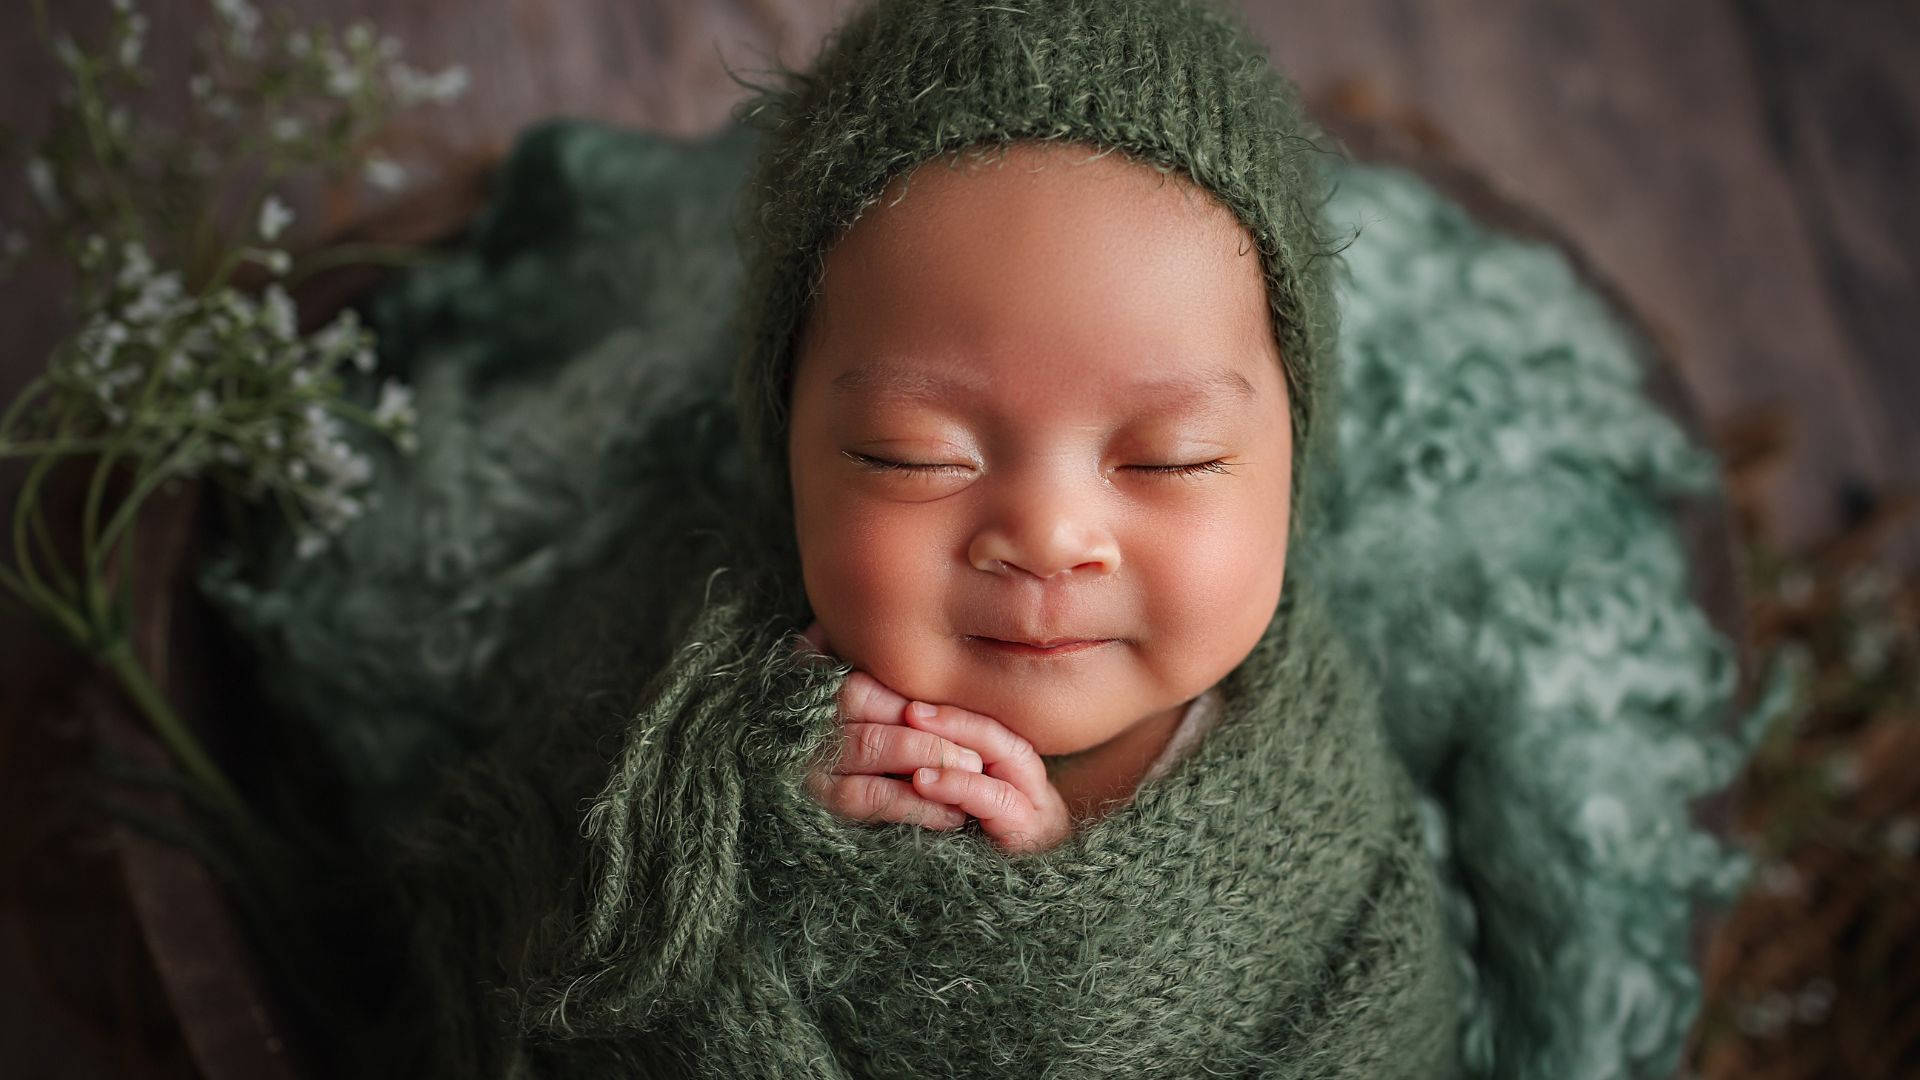 Baby Photography In Green Crochet Clothes Wallpaper